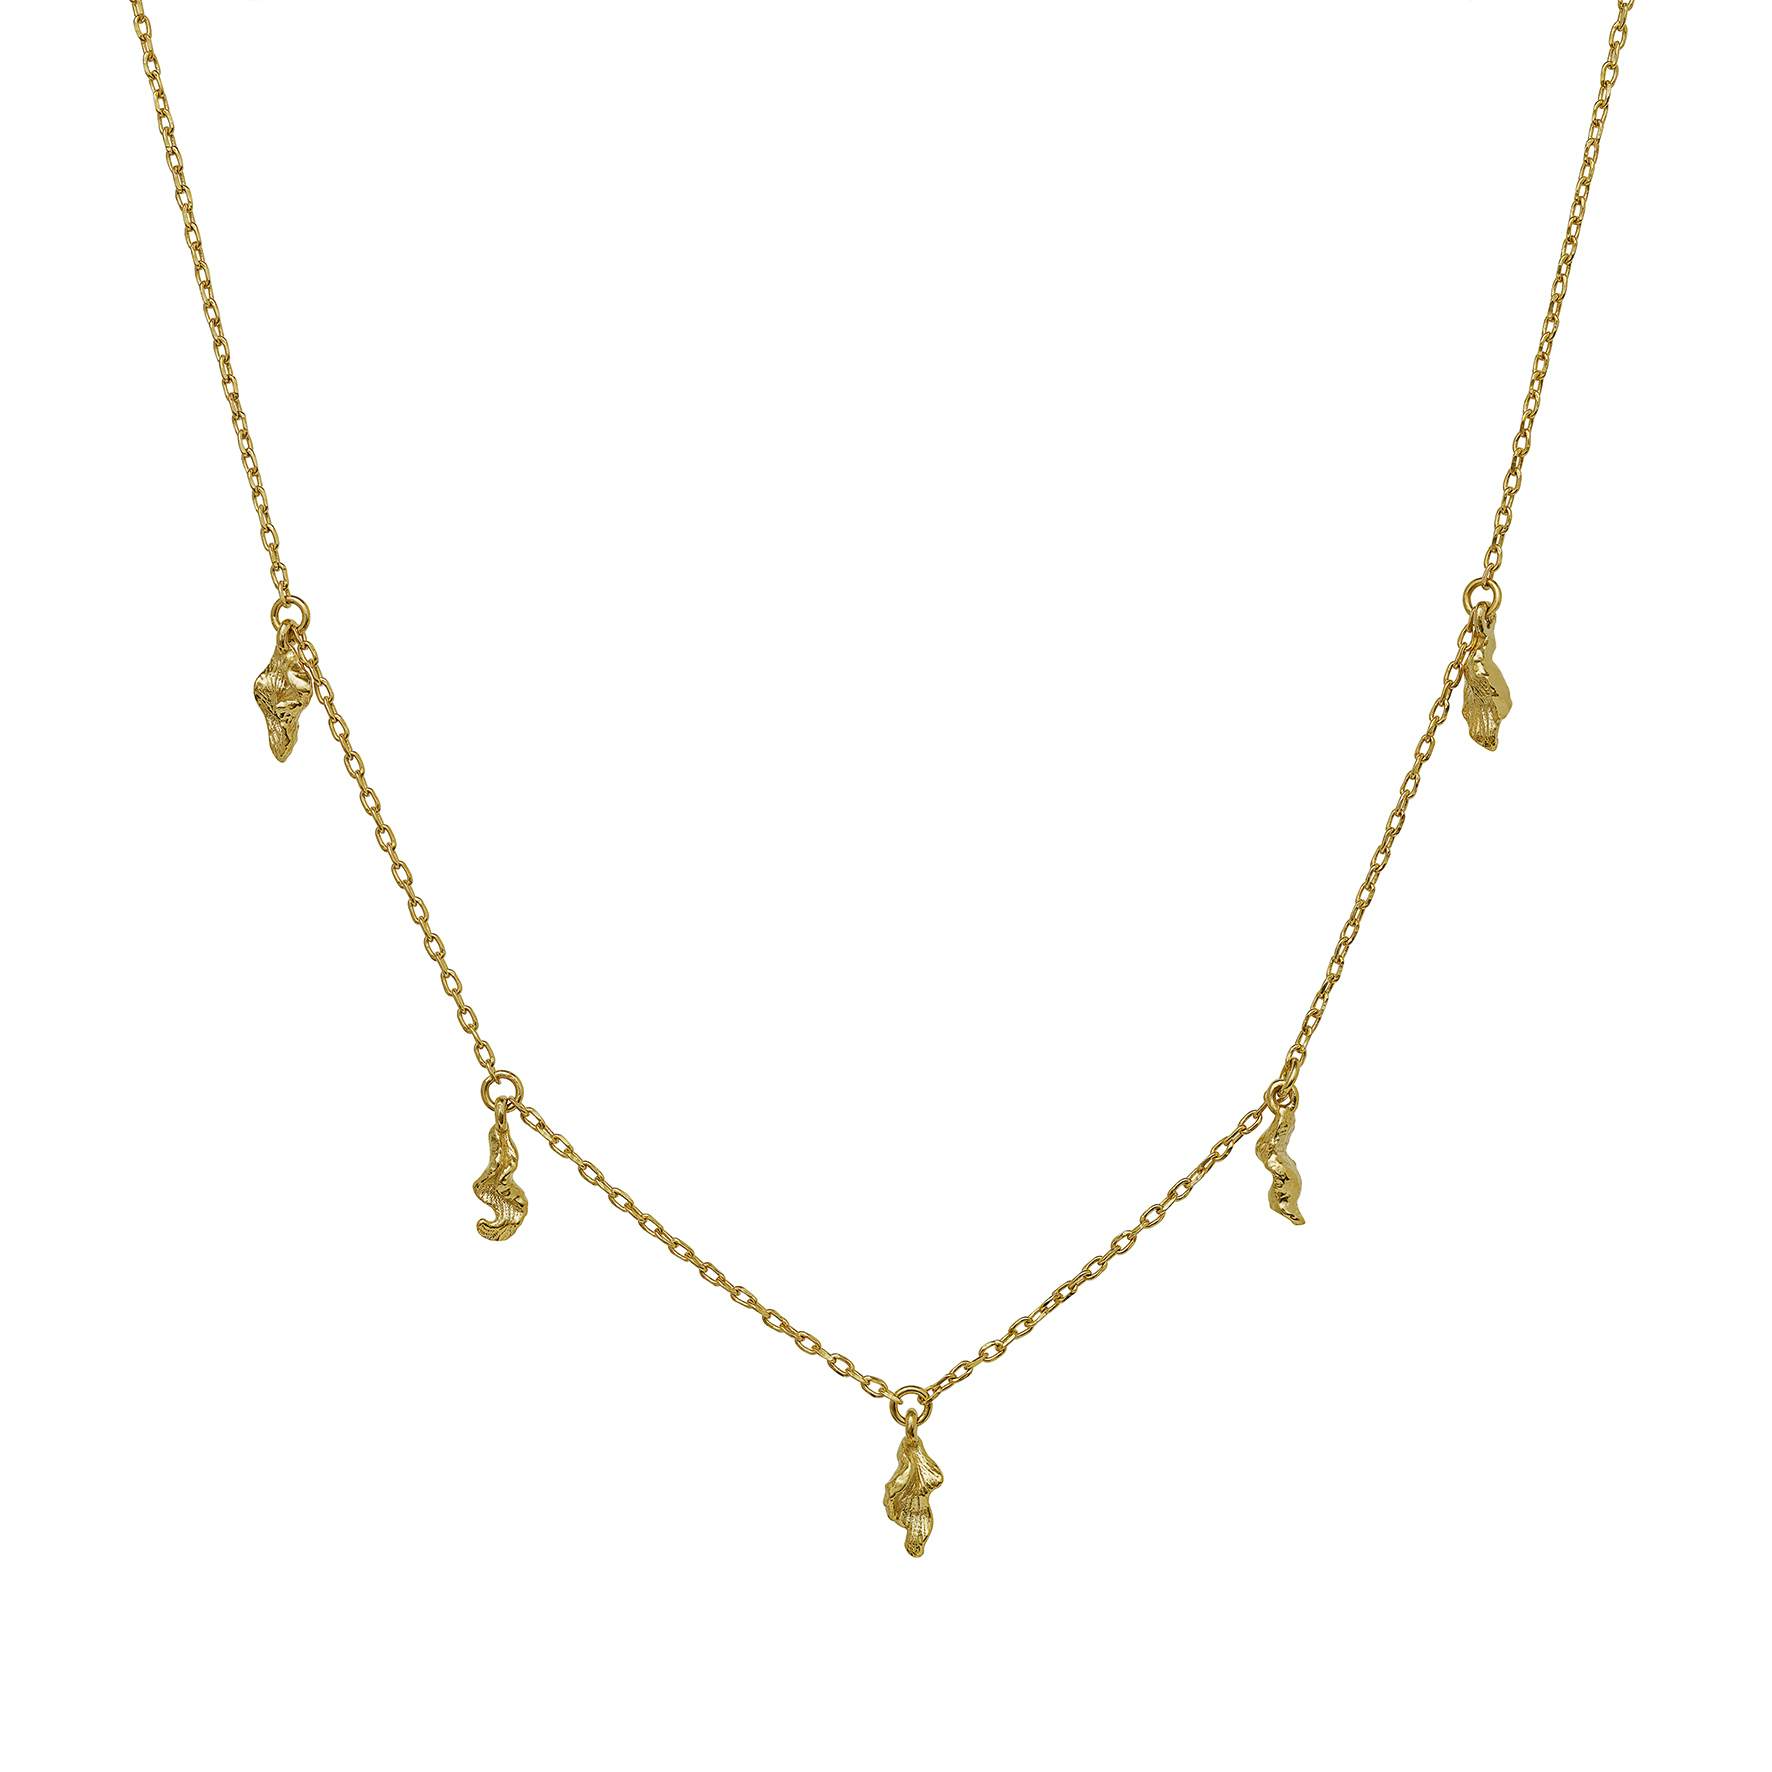 Marylou Necklace from Maanesten in Goldplated-Silver Sterling 925